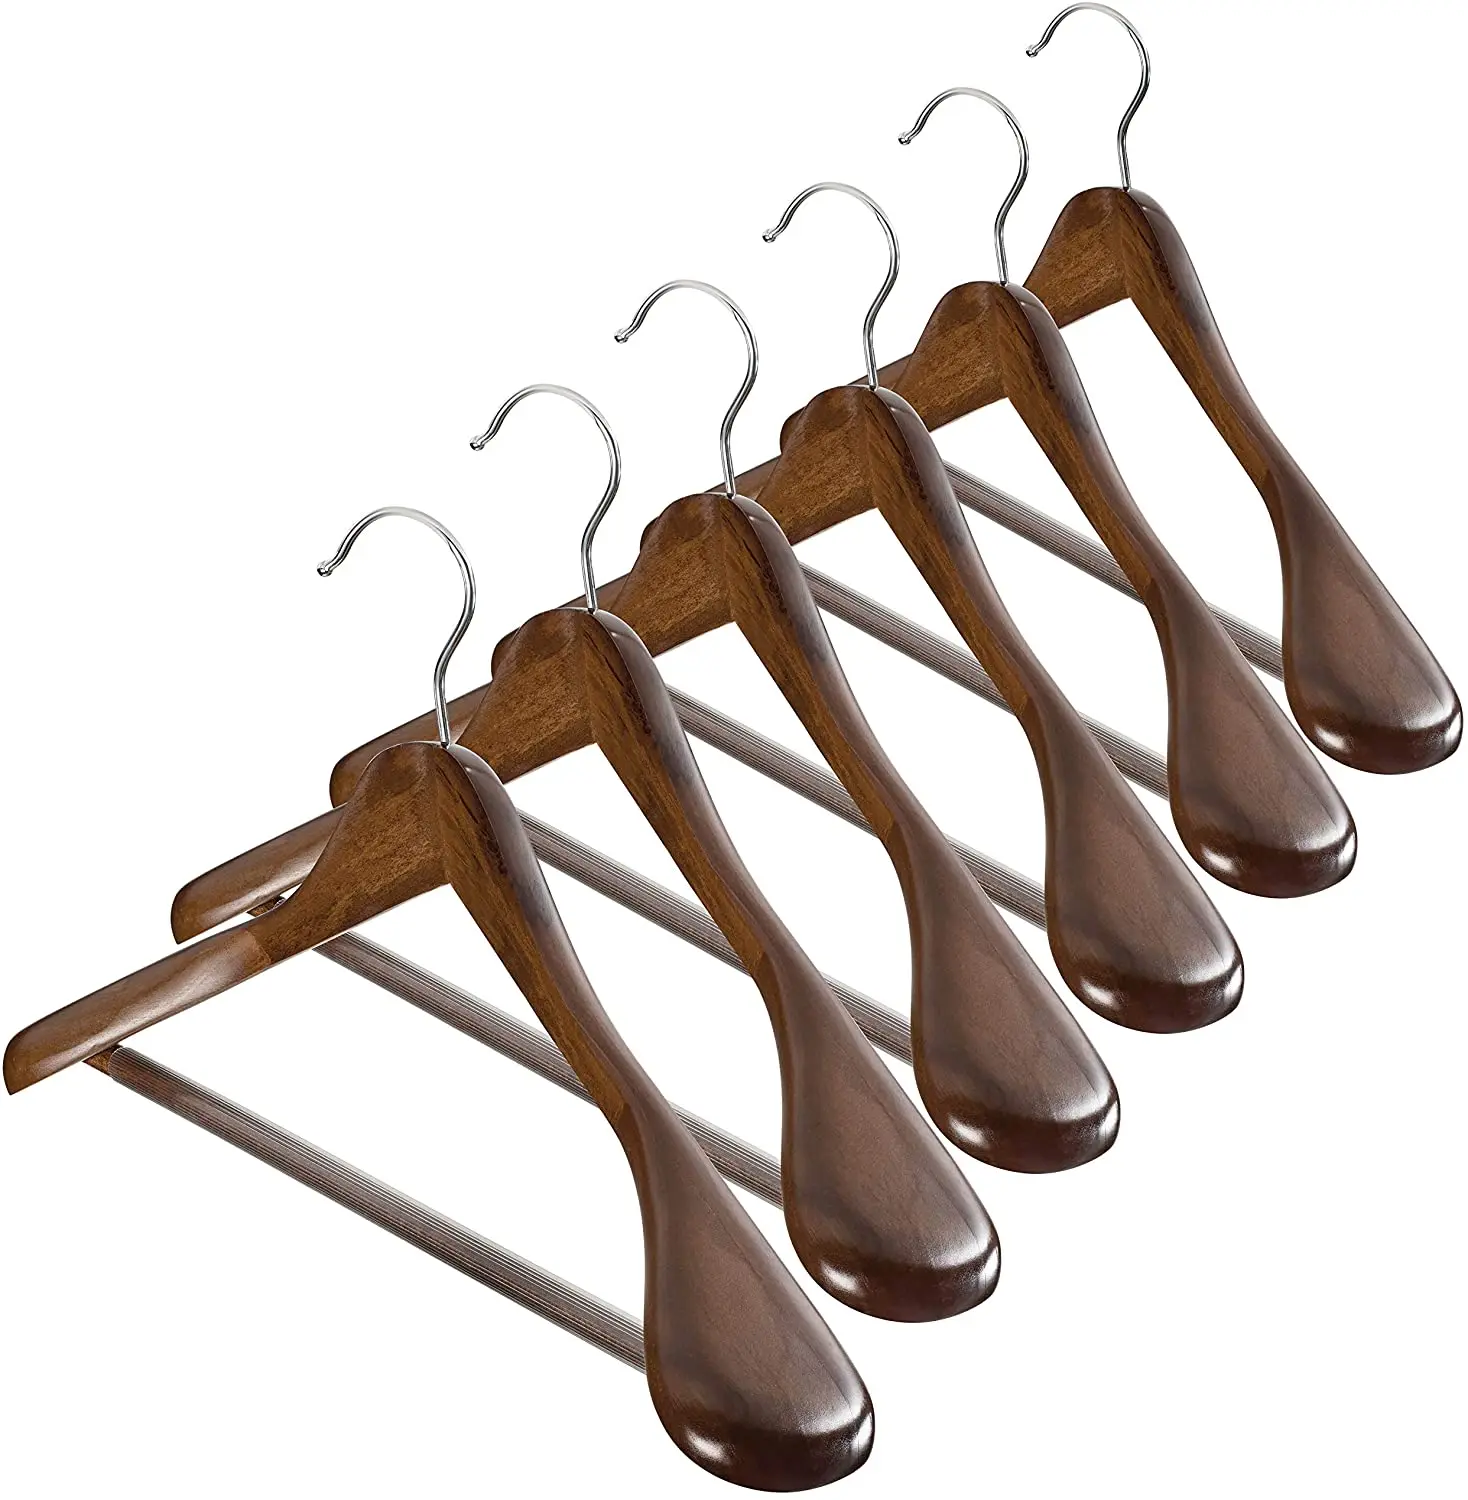 https://ae01.alicdn.com/kf/H3ce500b478fb423193601cdb7b1dc5f01/High-Grade-Wide-Shoulder-Wooden-Hangers-with-Non-Slip-Pants-Bar-Smooth-Finish-Solid-Wood-Suit.jpg